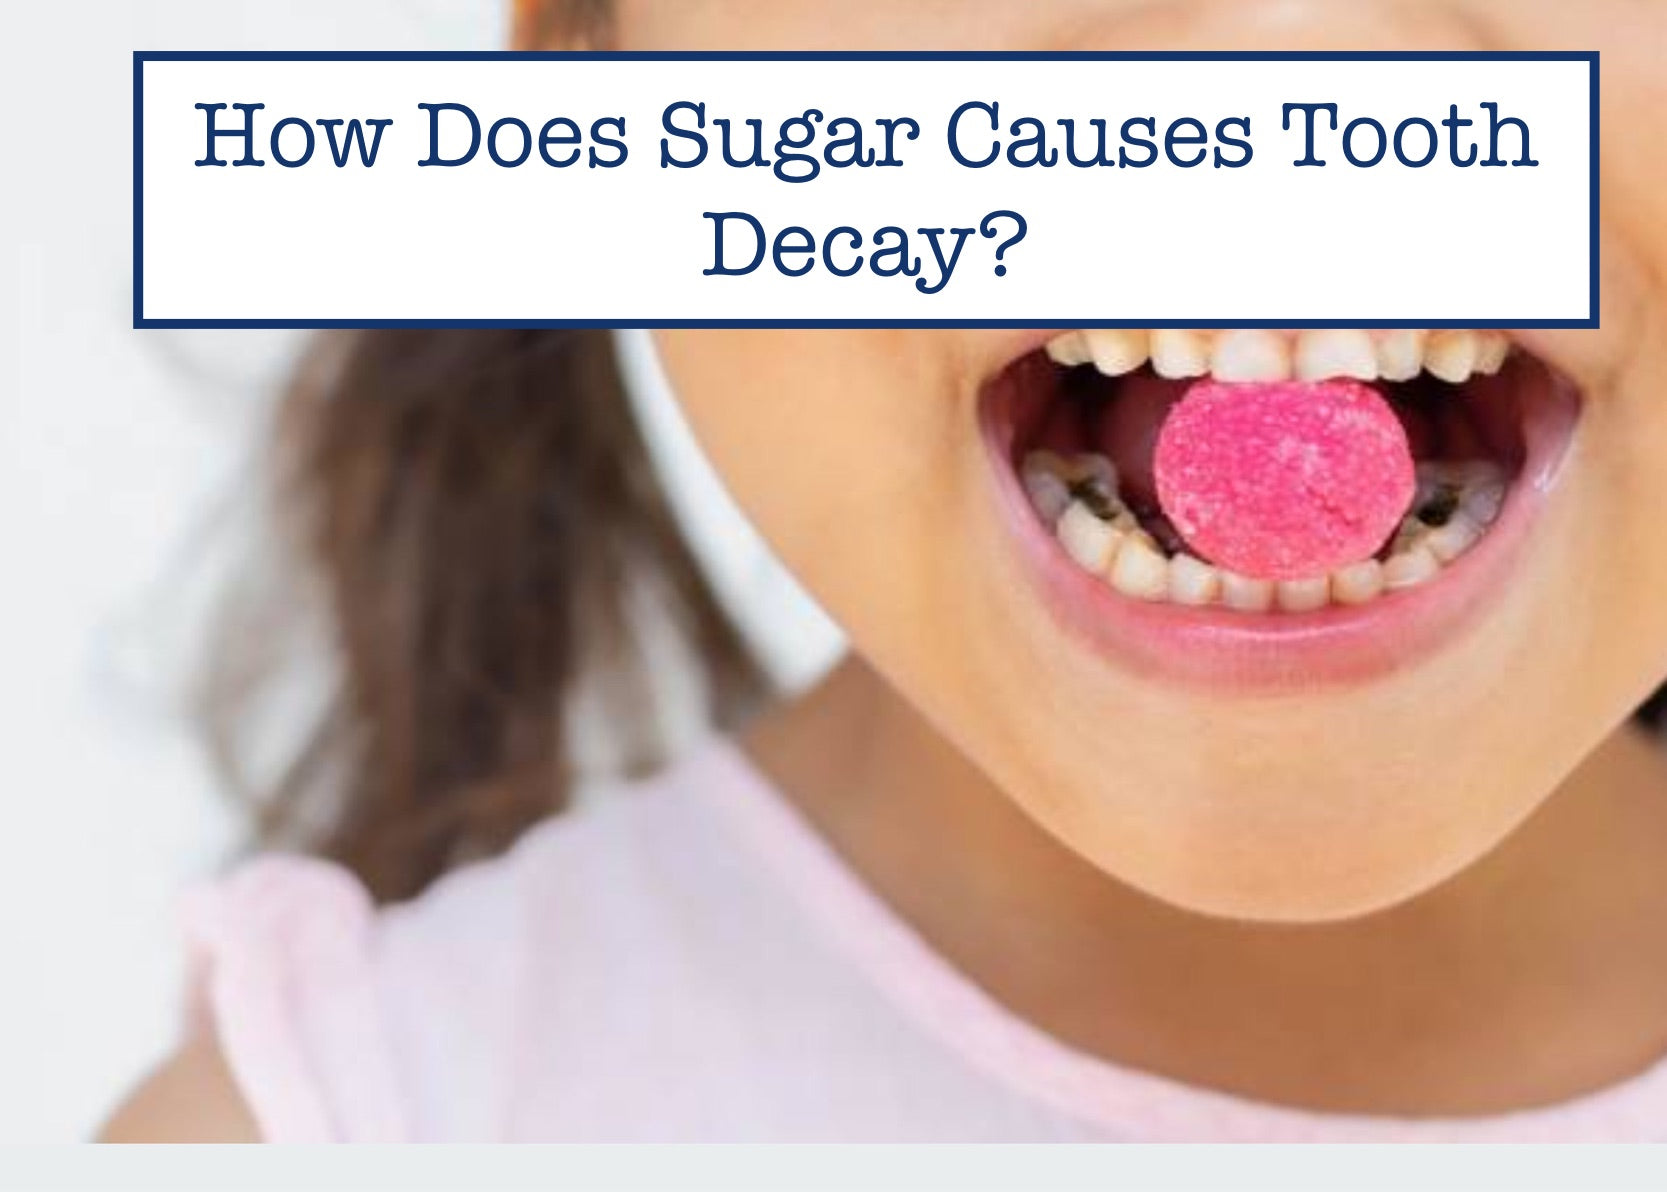 How Does Sugar Causes Tooth Decay?